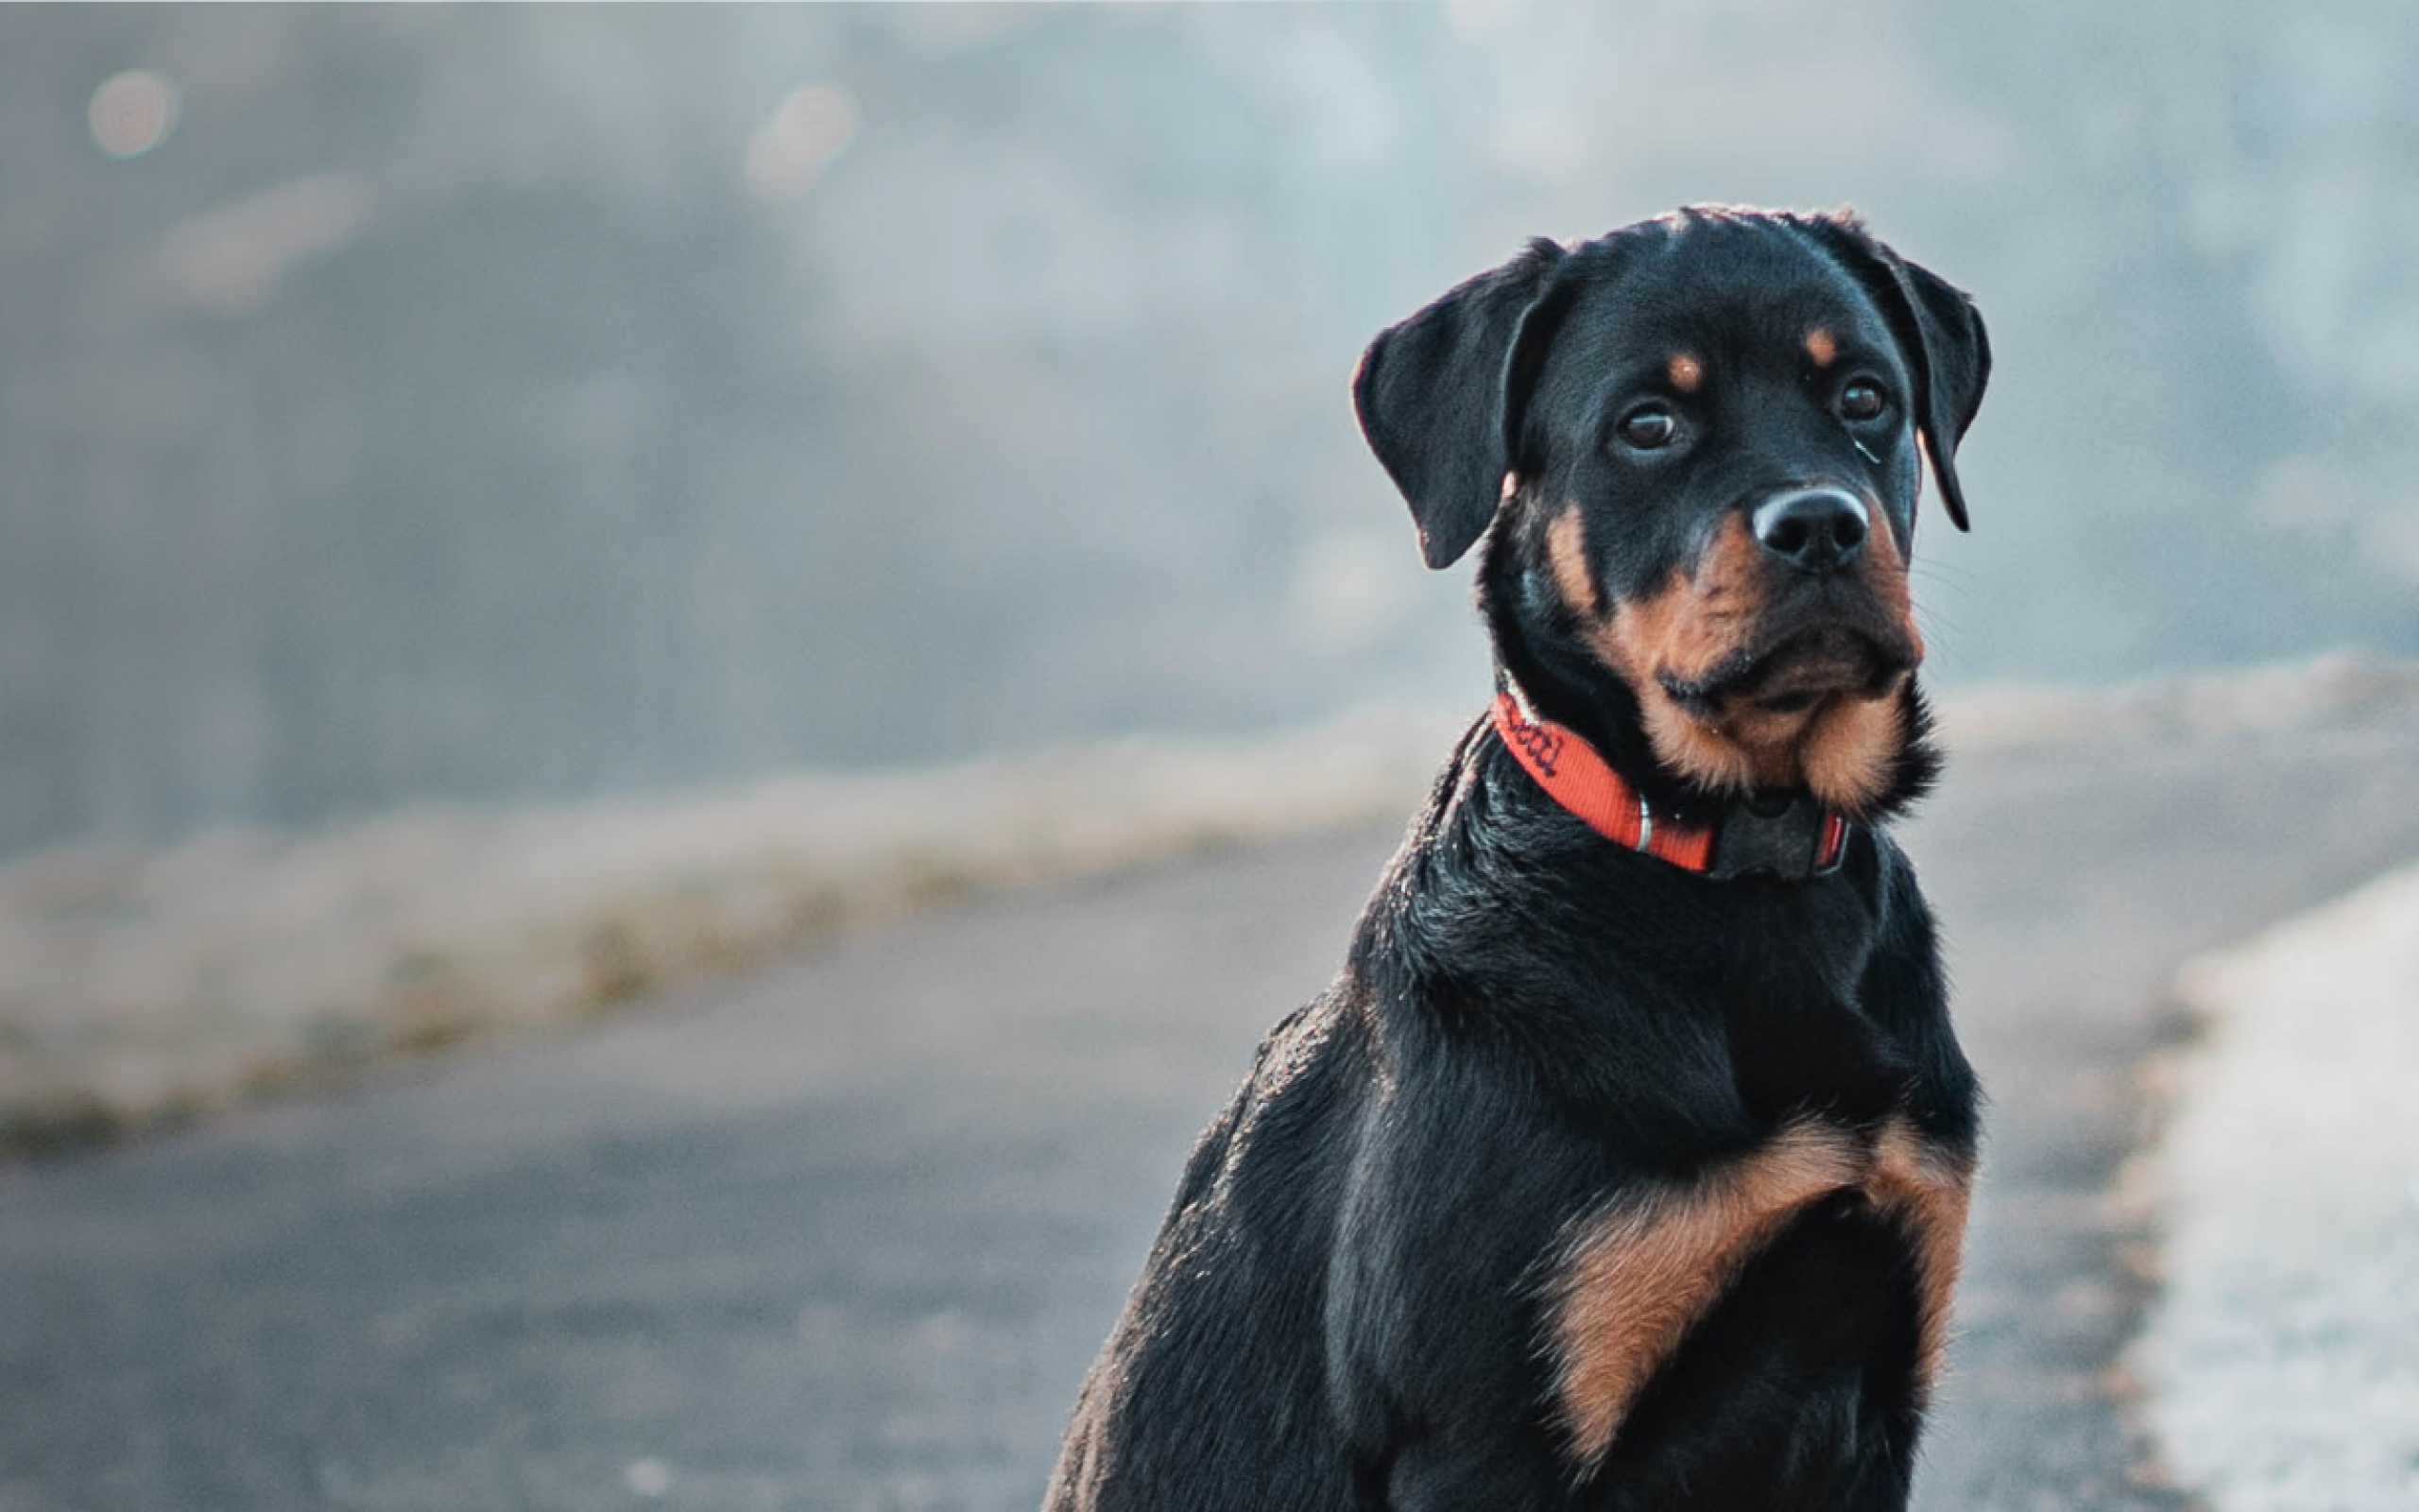 A happy and healthy Rottweiler